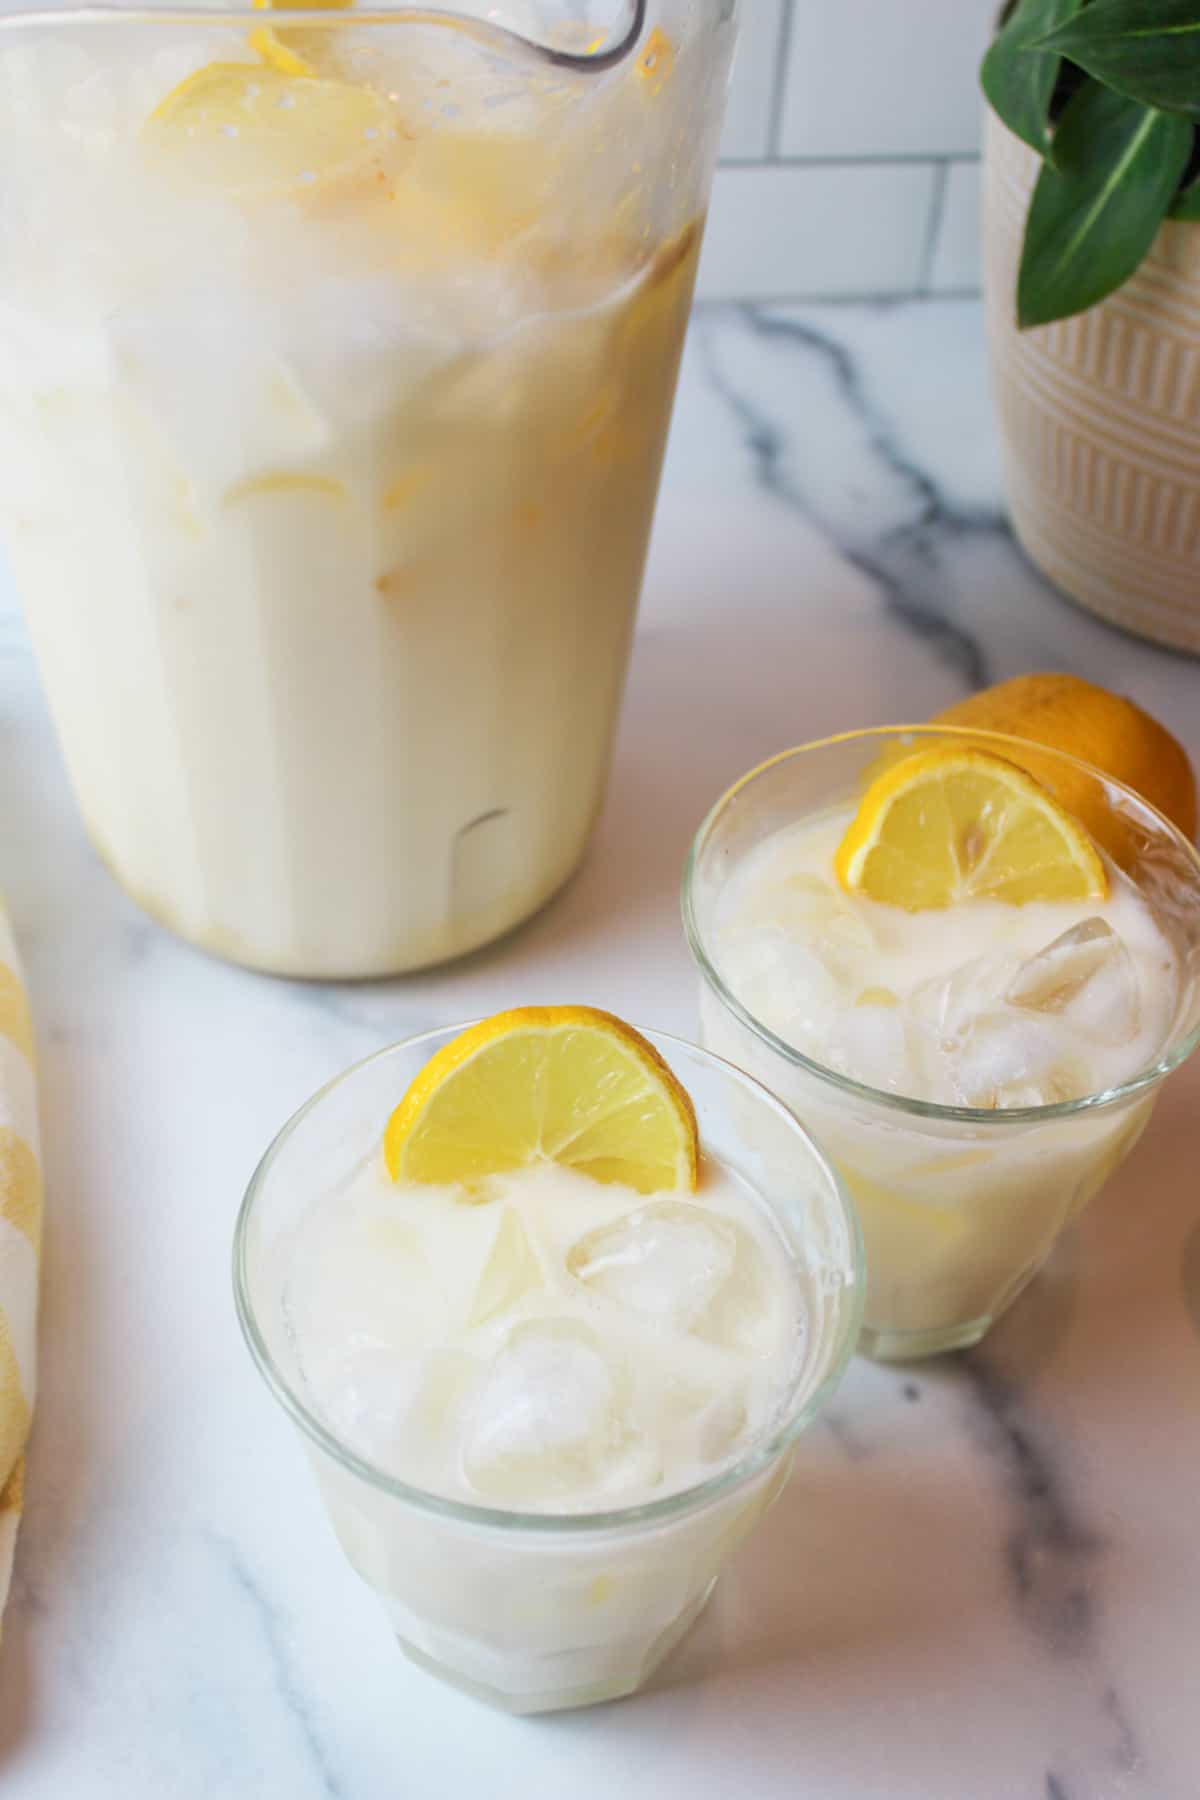 angled view of two glasses full of creamy lemonade with ice and lemon slices